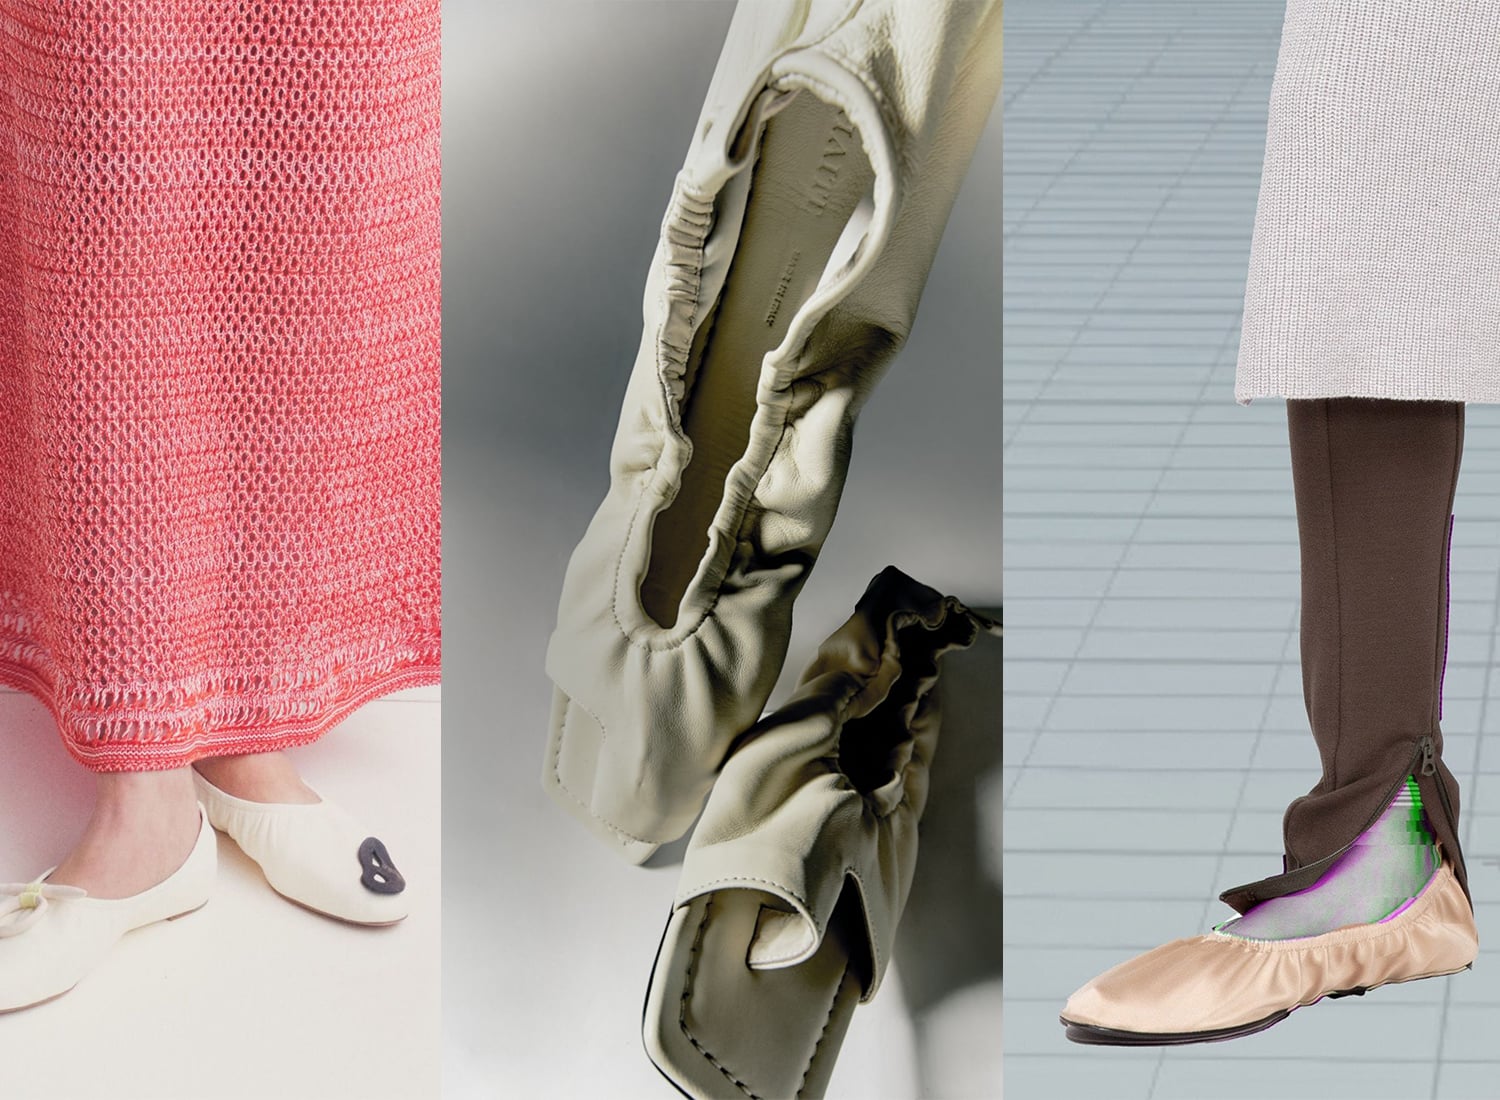 Spring/Summer 2021 Trend: Ballet Flats | 8 Shoe Trends Straight From the Runway That Are Finally Here For the Summer | POPSUGAR Fashion Photo 26